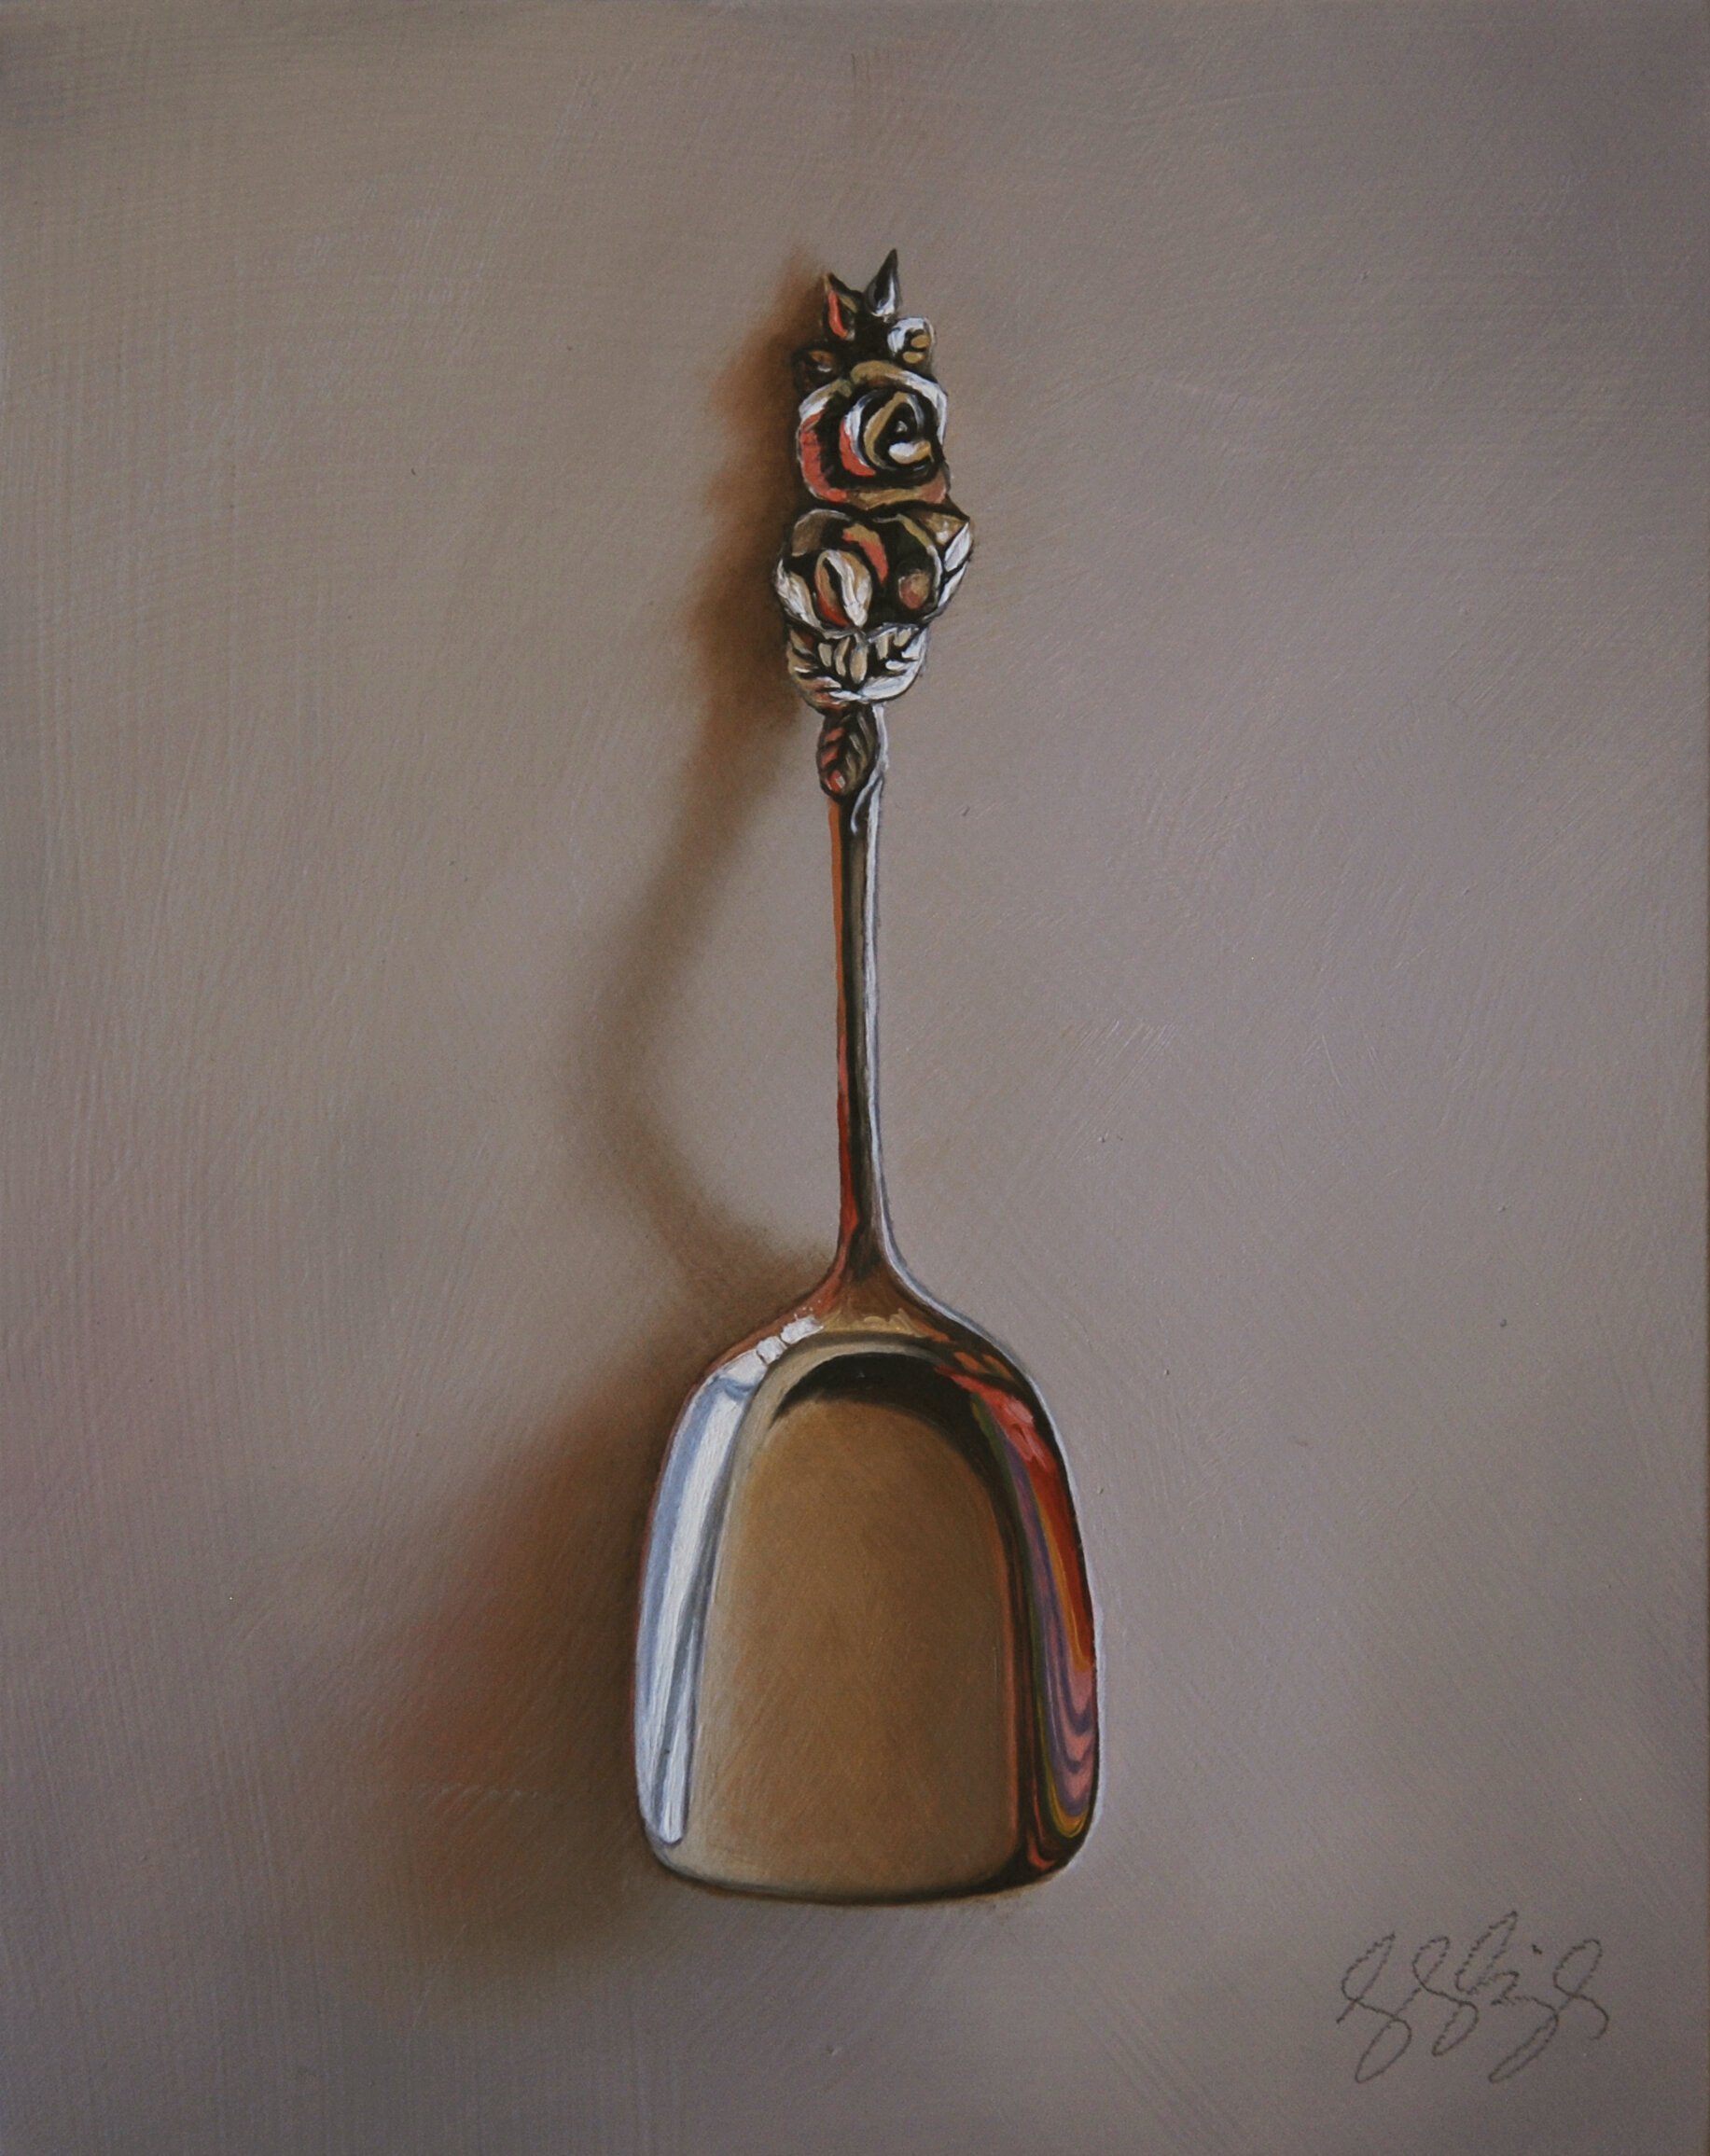   Silver Spoon #168, The Shapeshifter  Oil on panel, 2020. 7x5.5” 